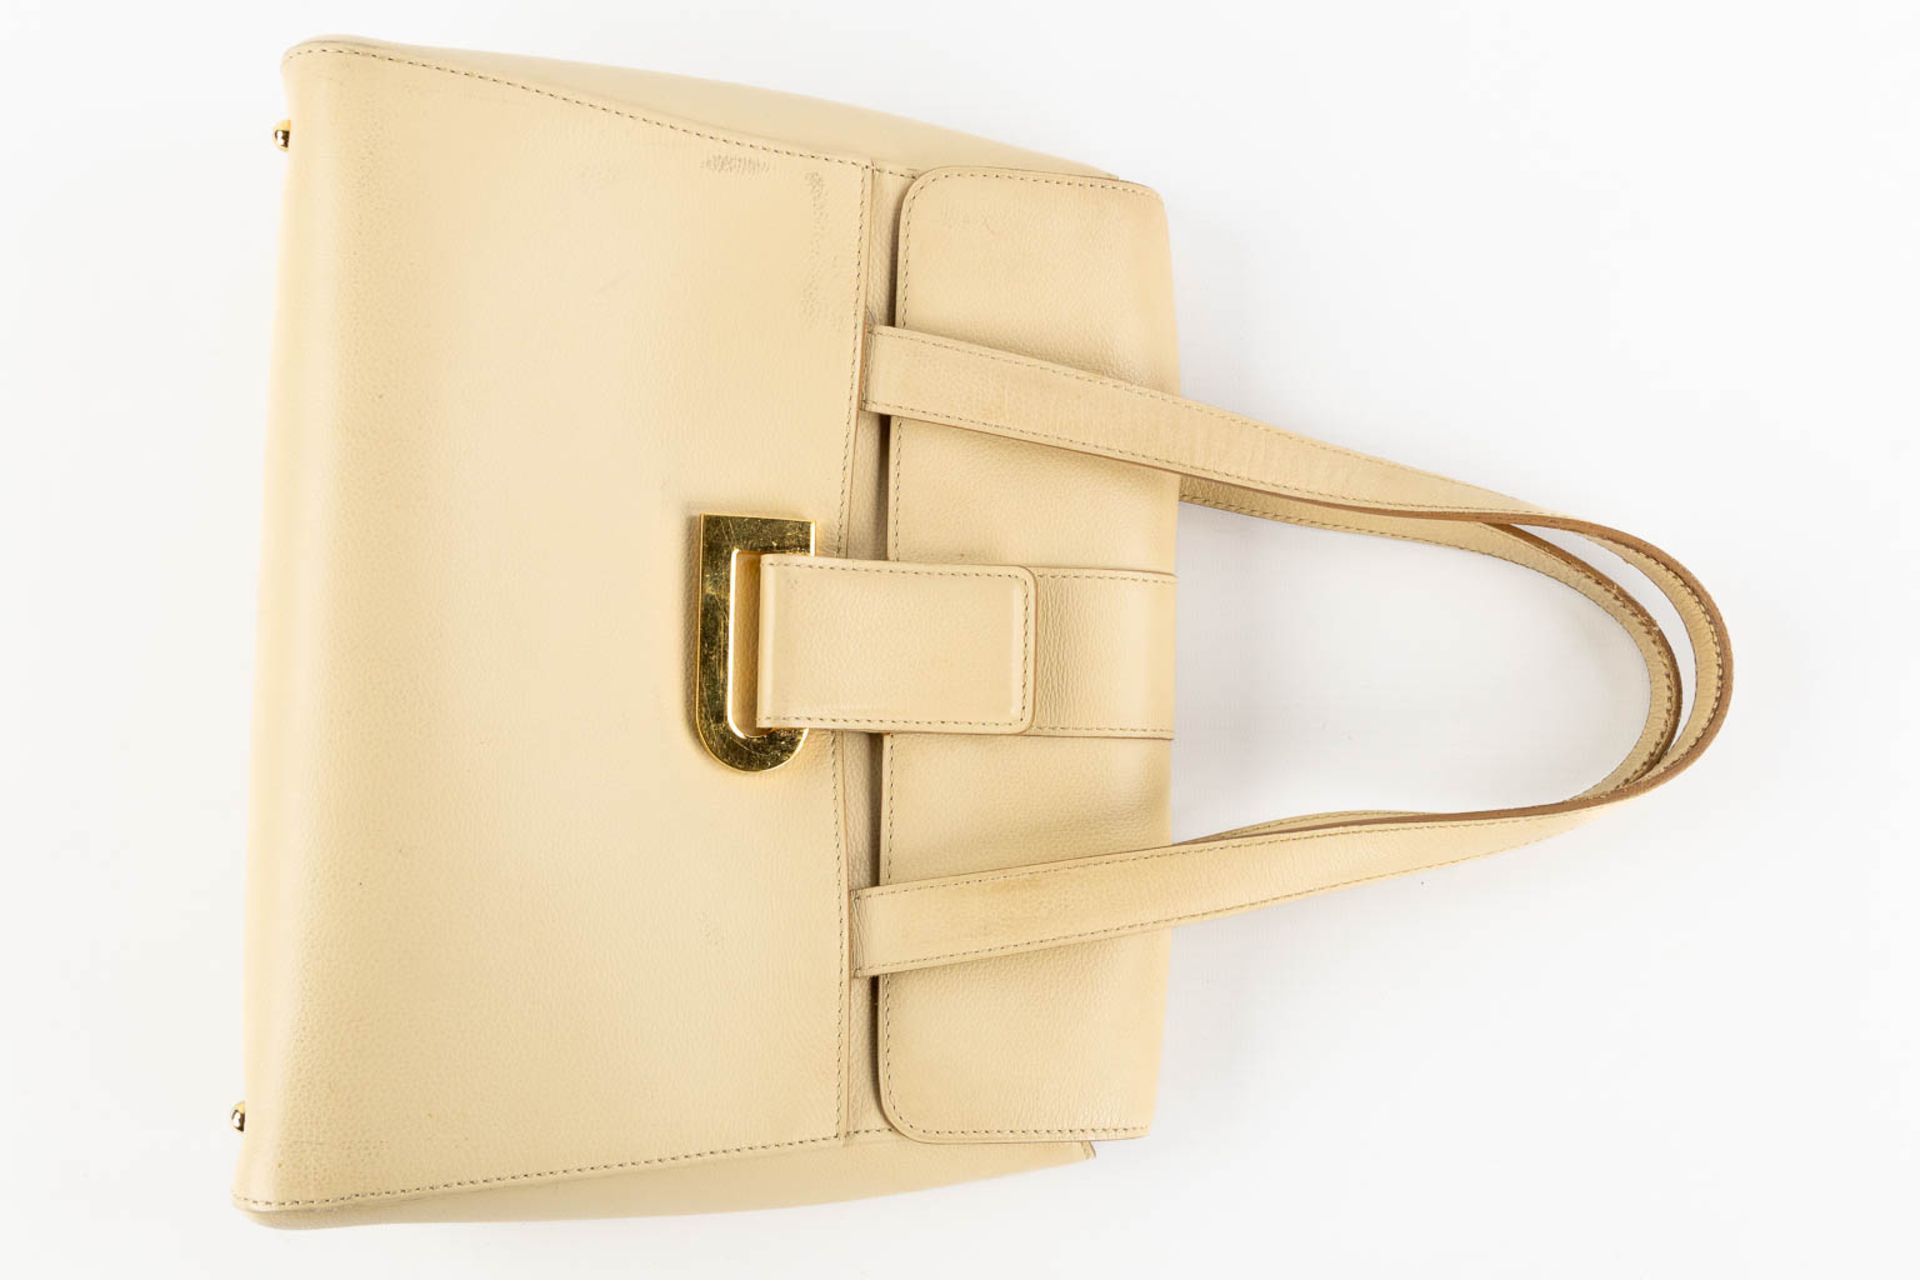 Delvaux model 'Reverie' Jumping, Ivoire. Ivory coloured leather. (L:11 x W:28 x H:23 cm) - Image 10 of 20